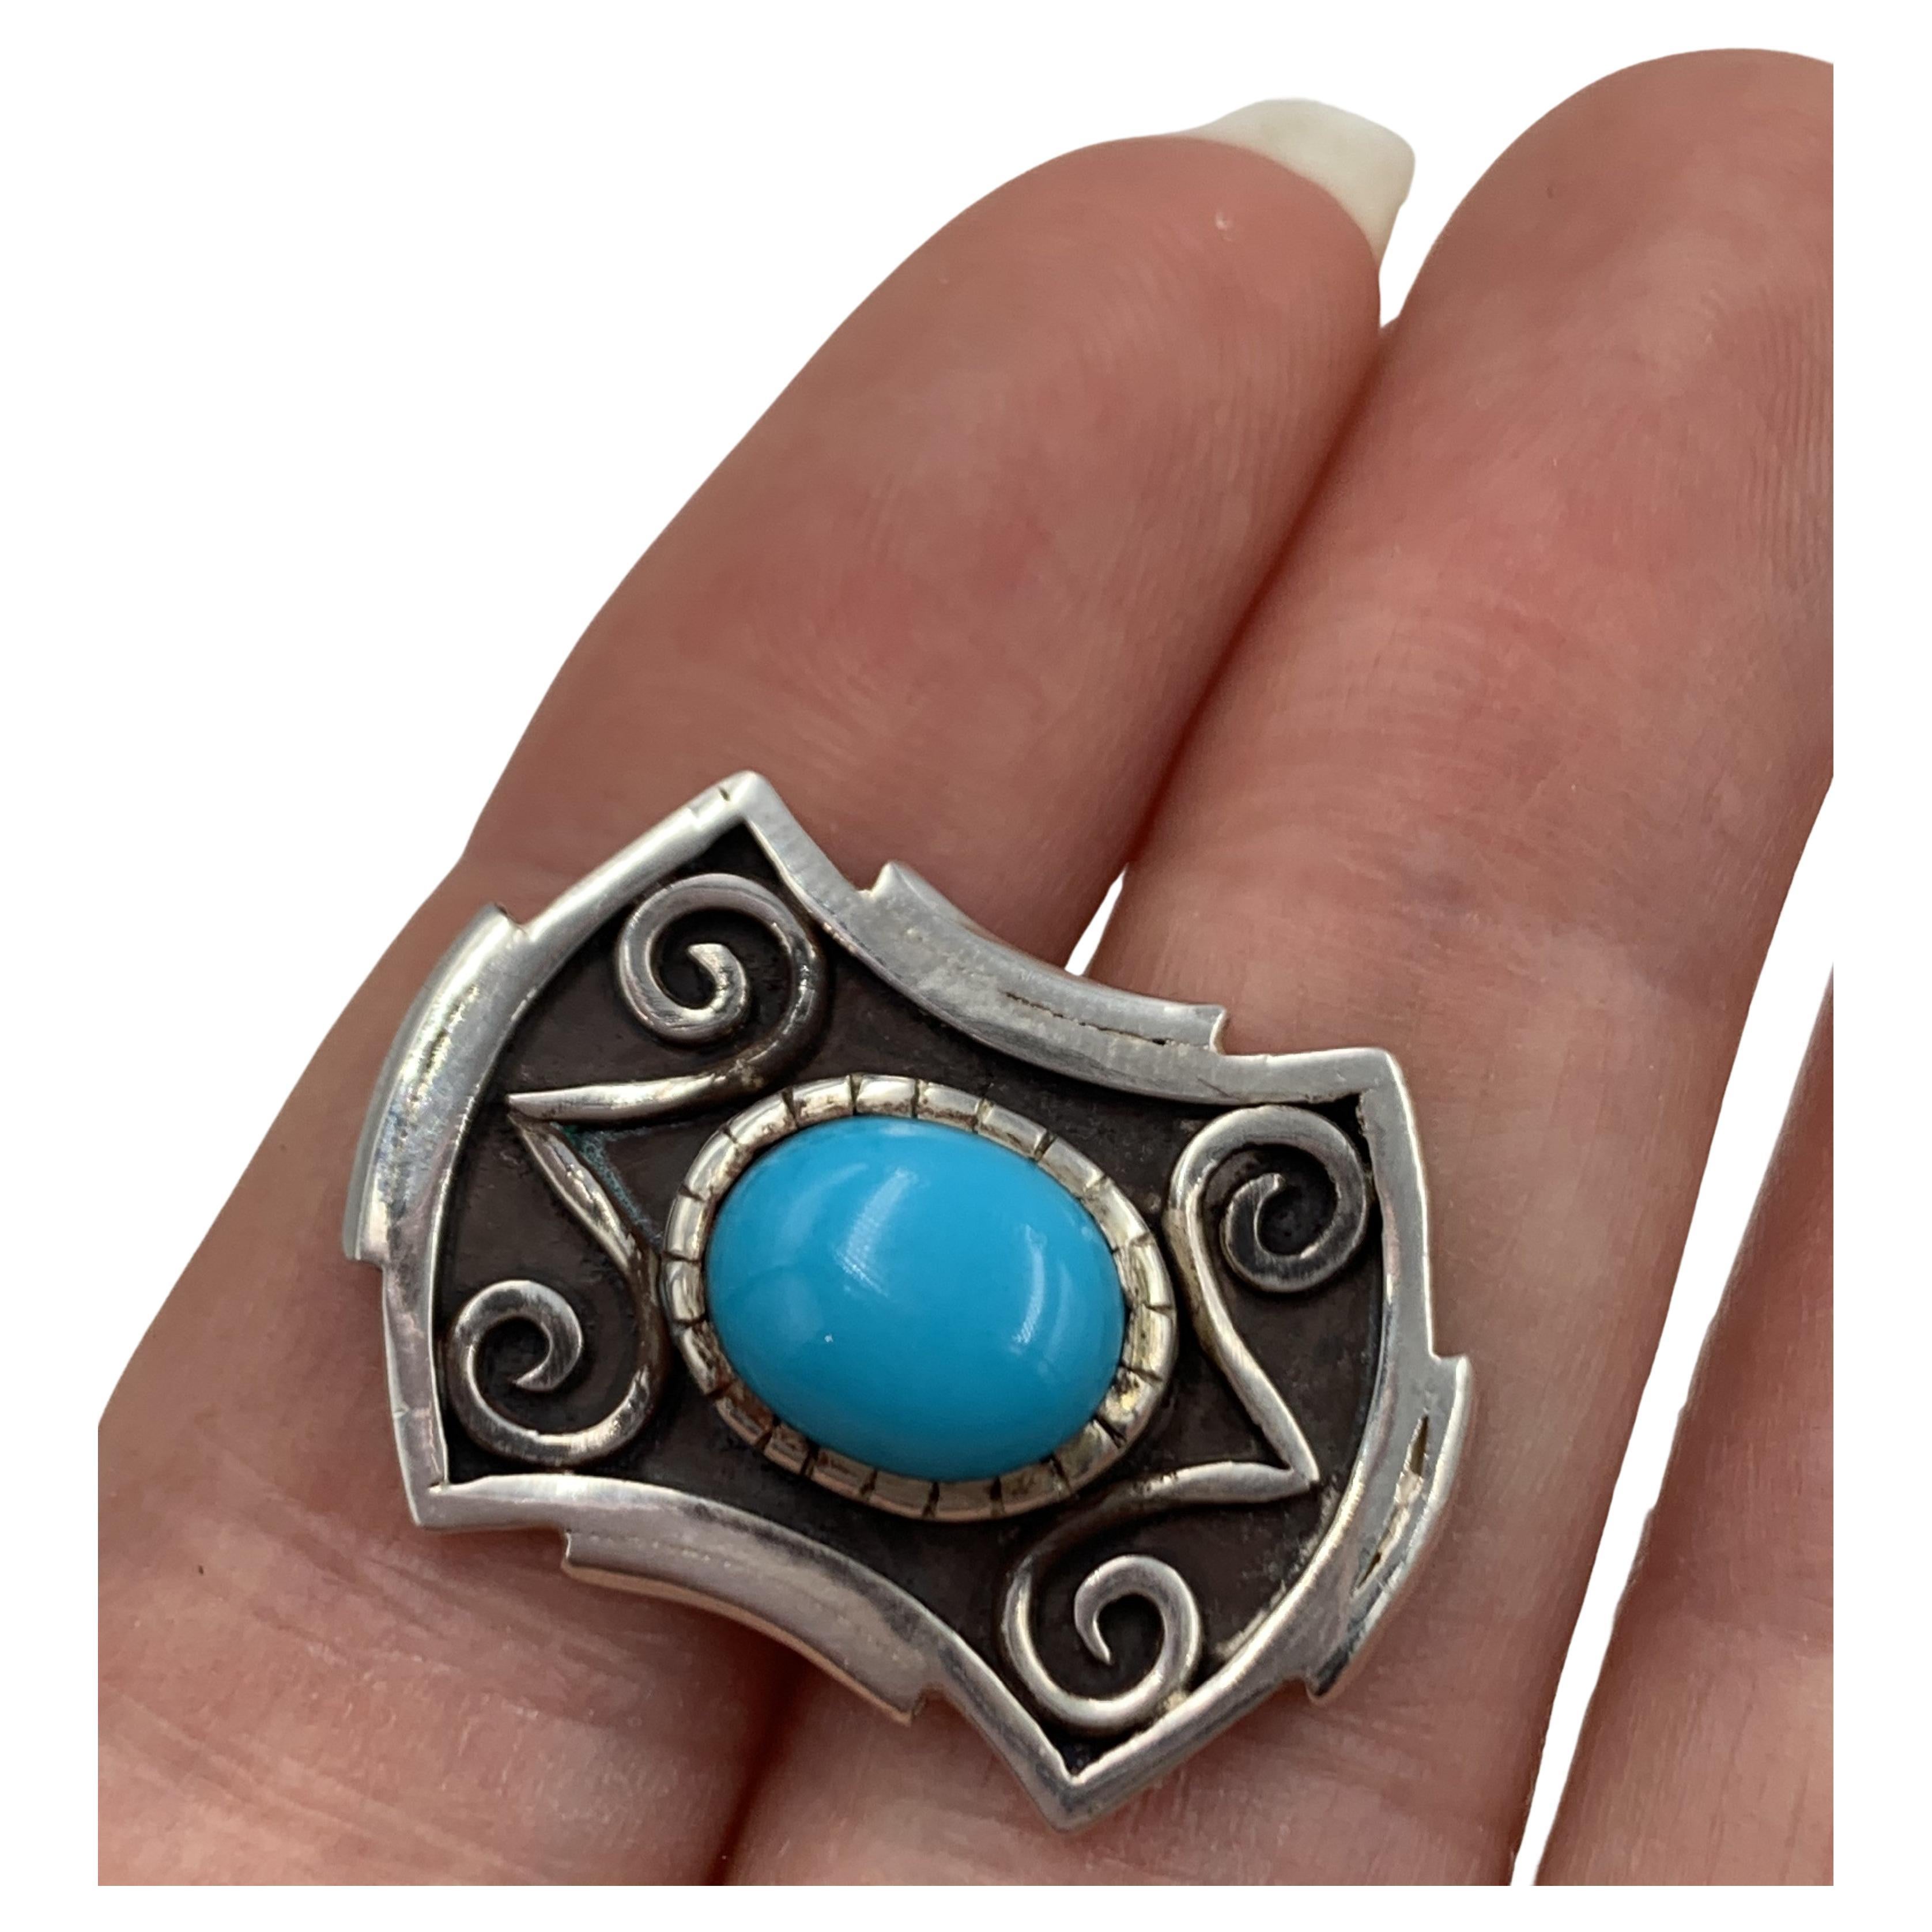 Sterling silver cuff links made exclusively for Shades of the West by one of our Navajo silversmiths. The 1” x 3/4” cufflinks have a 1/4” x 1/2” Sleeping Beauty turquoise cabochon.

Signed “Shades of the West”

Located in Globe, AZ, the Sleeping